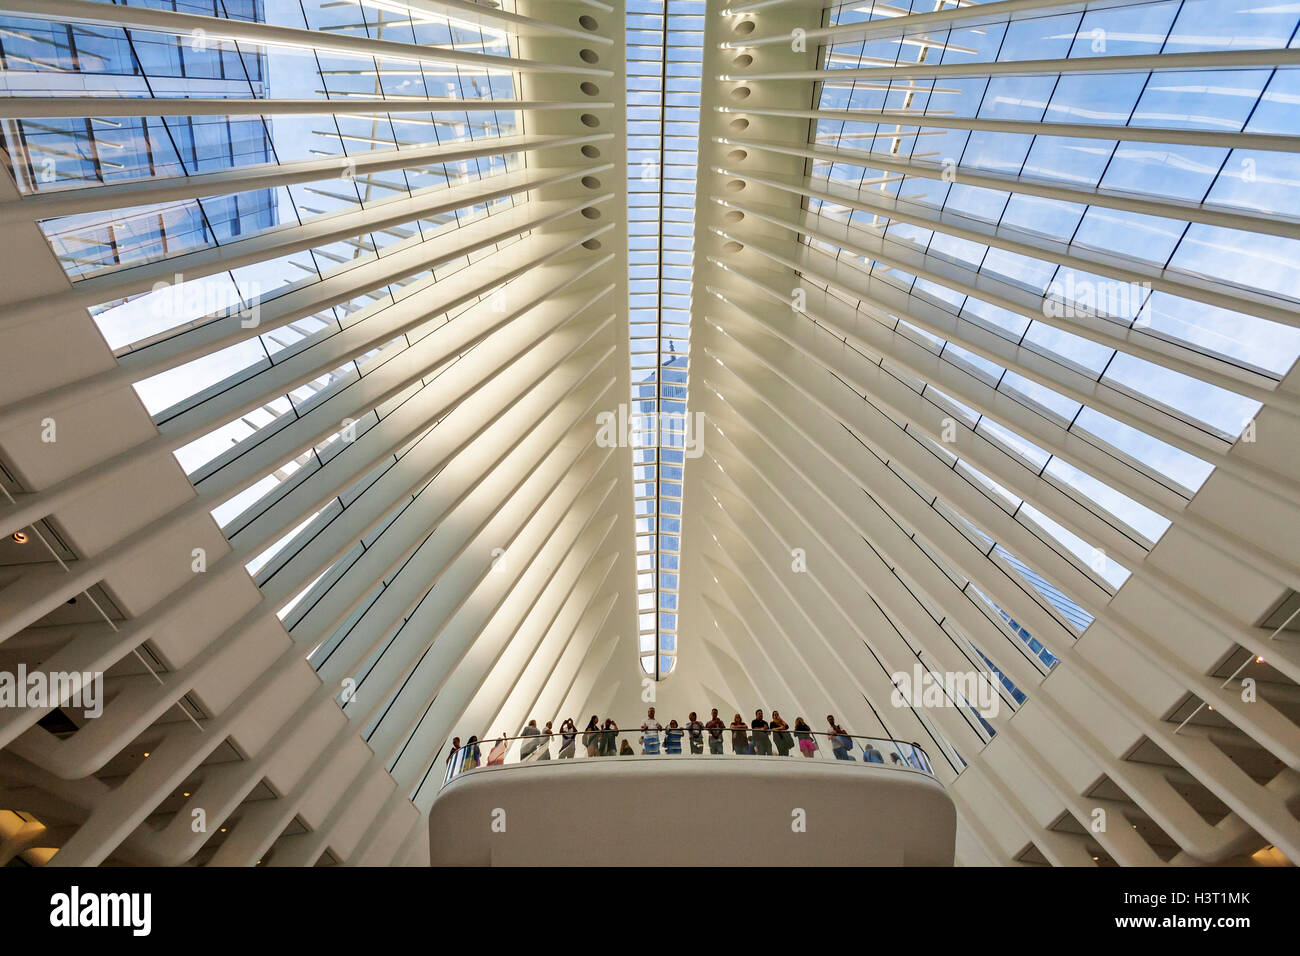 Interior view of the Freedom Tower World Trade Center Transportation Transit Hub and Center. Stock Photo